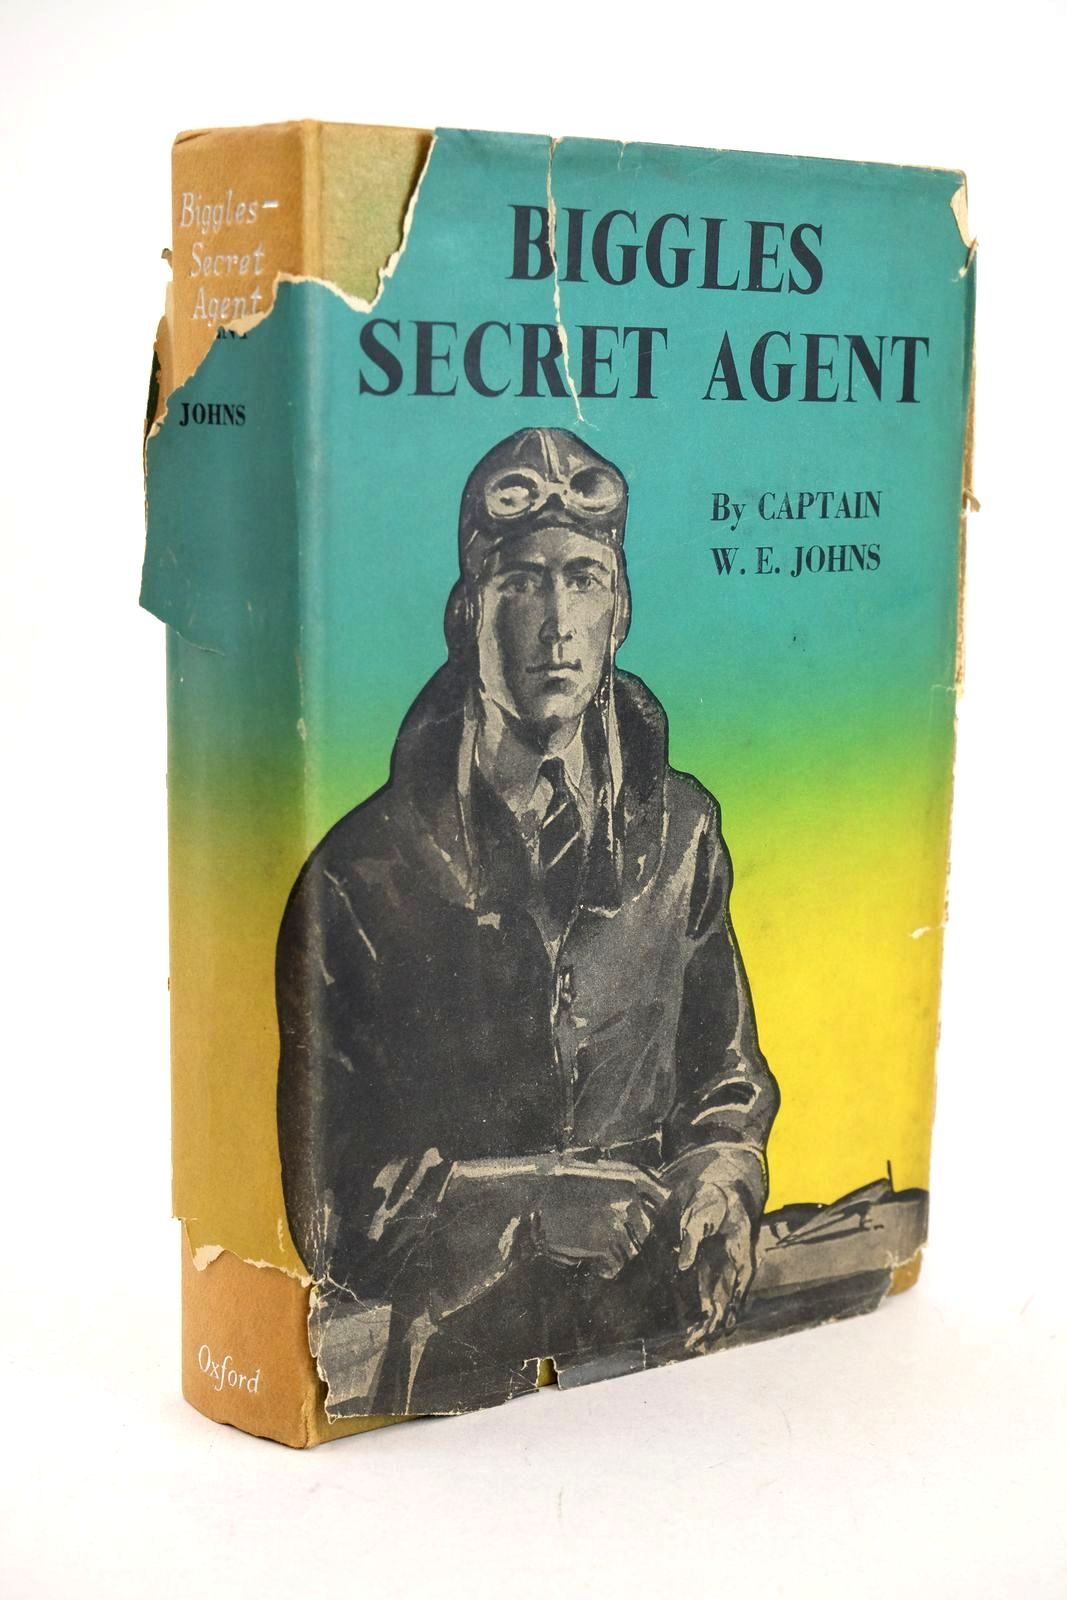 Photo of BIGGLES SECRET AGENT written by Johns, W.E. illustrated by Sindall, Alfred published by Oxford University Press, Geoffrey Cumberlege (STOCK CODE: 1326687)  for sale by Stella & Rose's Books